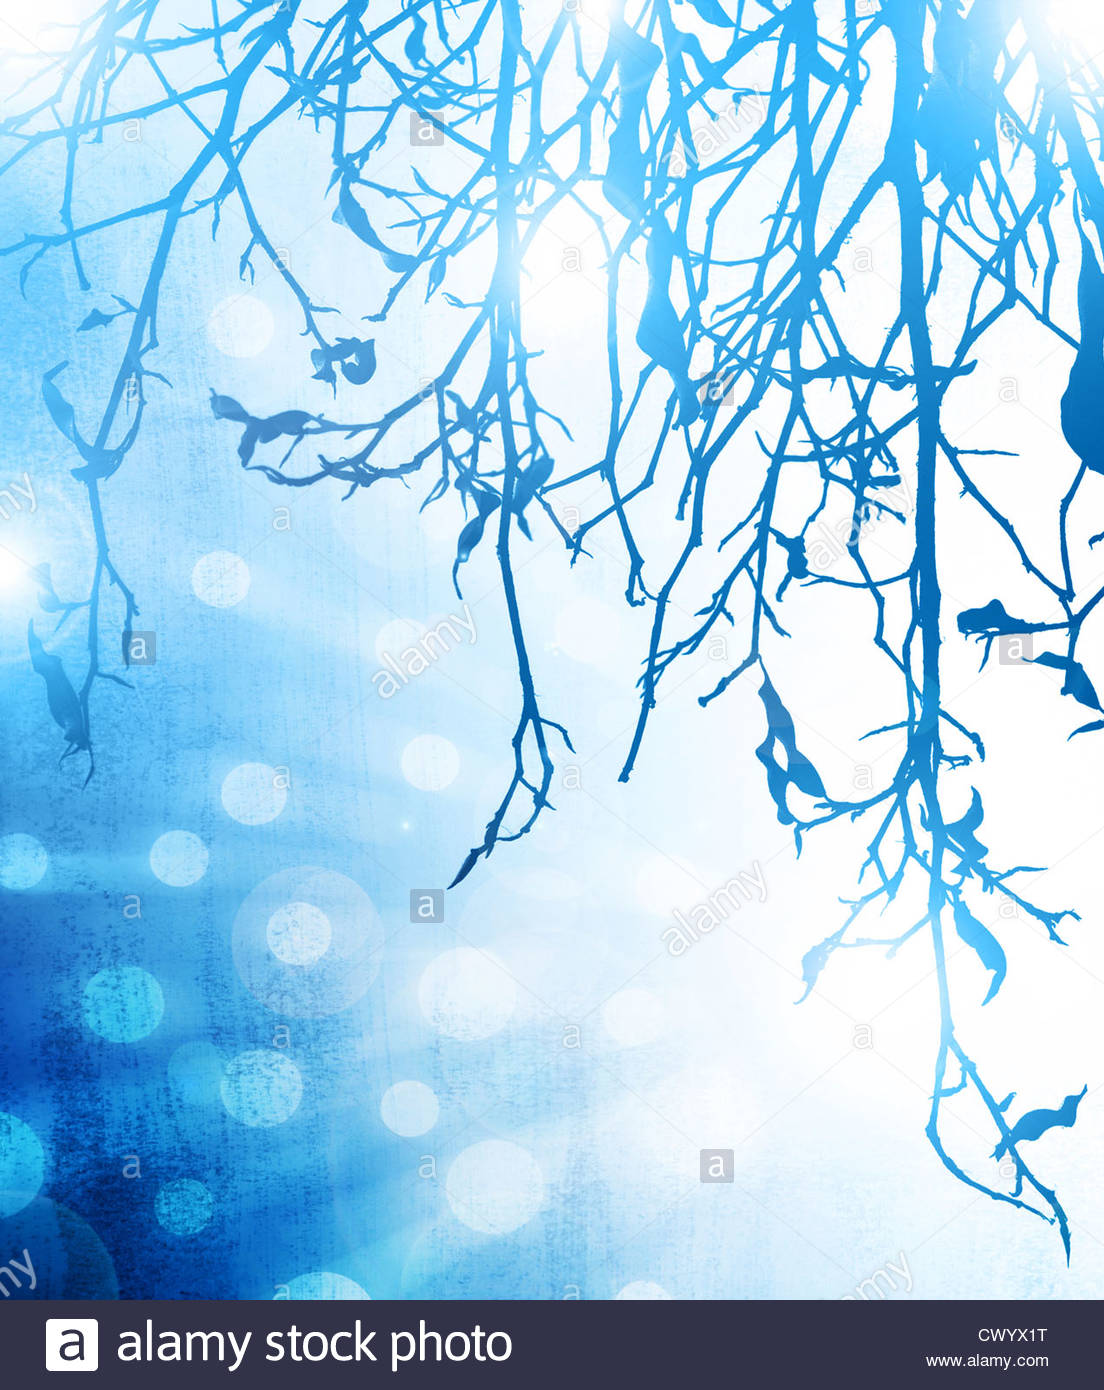 Picture Of Blue Abstract Winter Background Frozen Tree Branch And